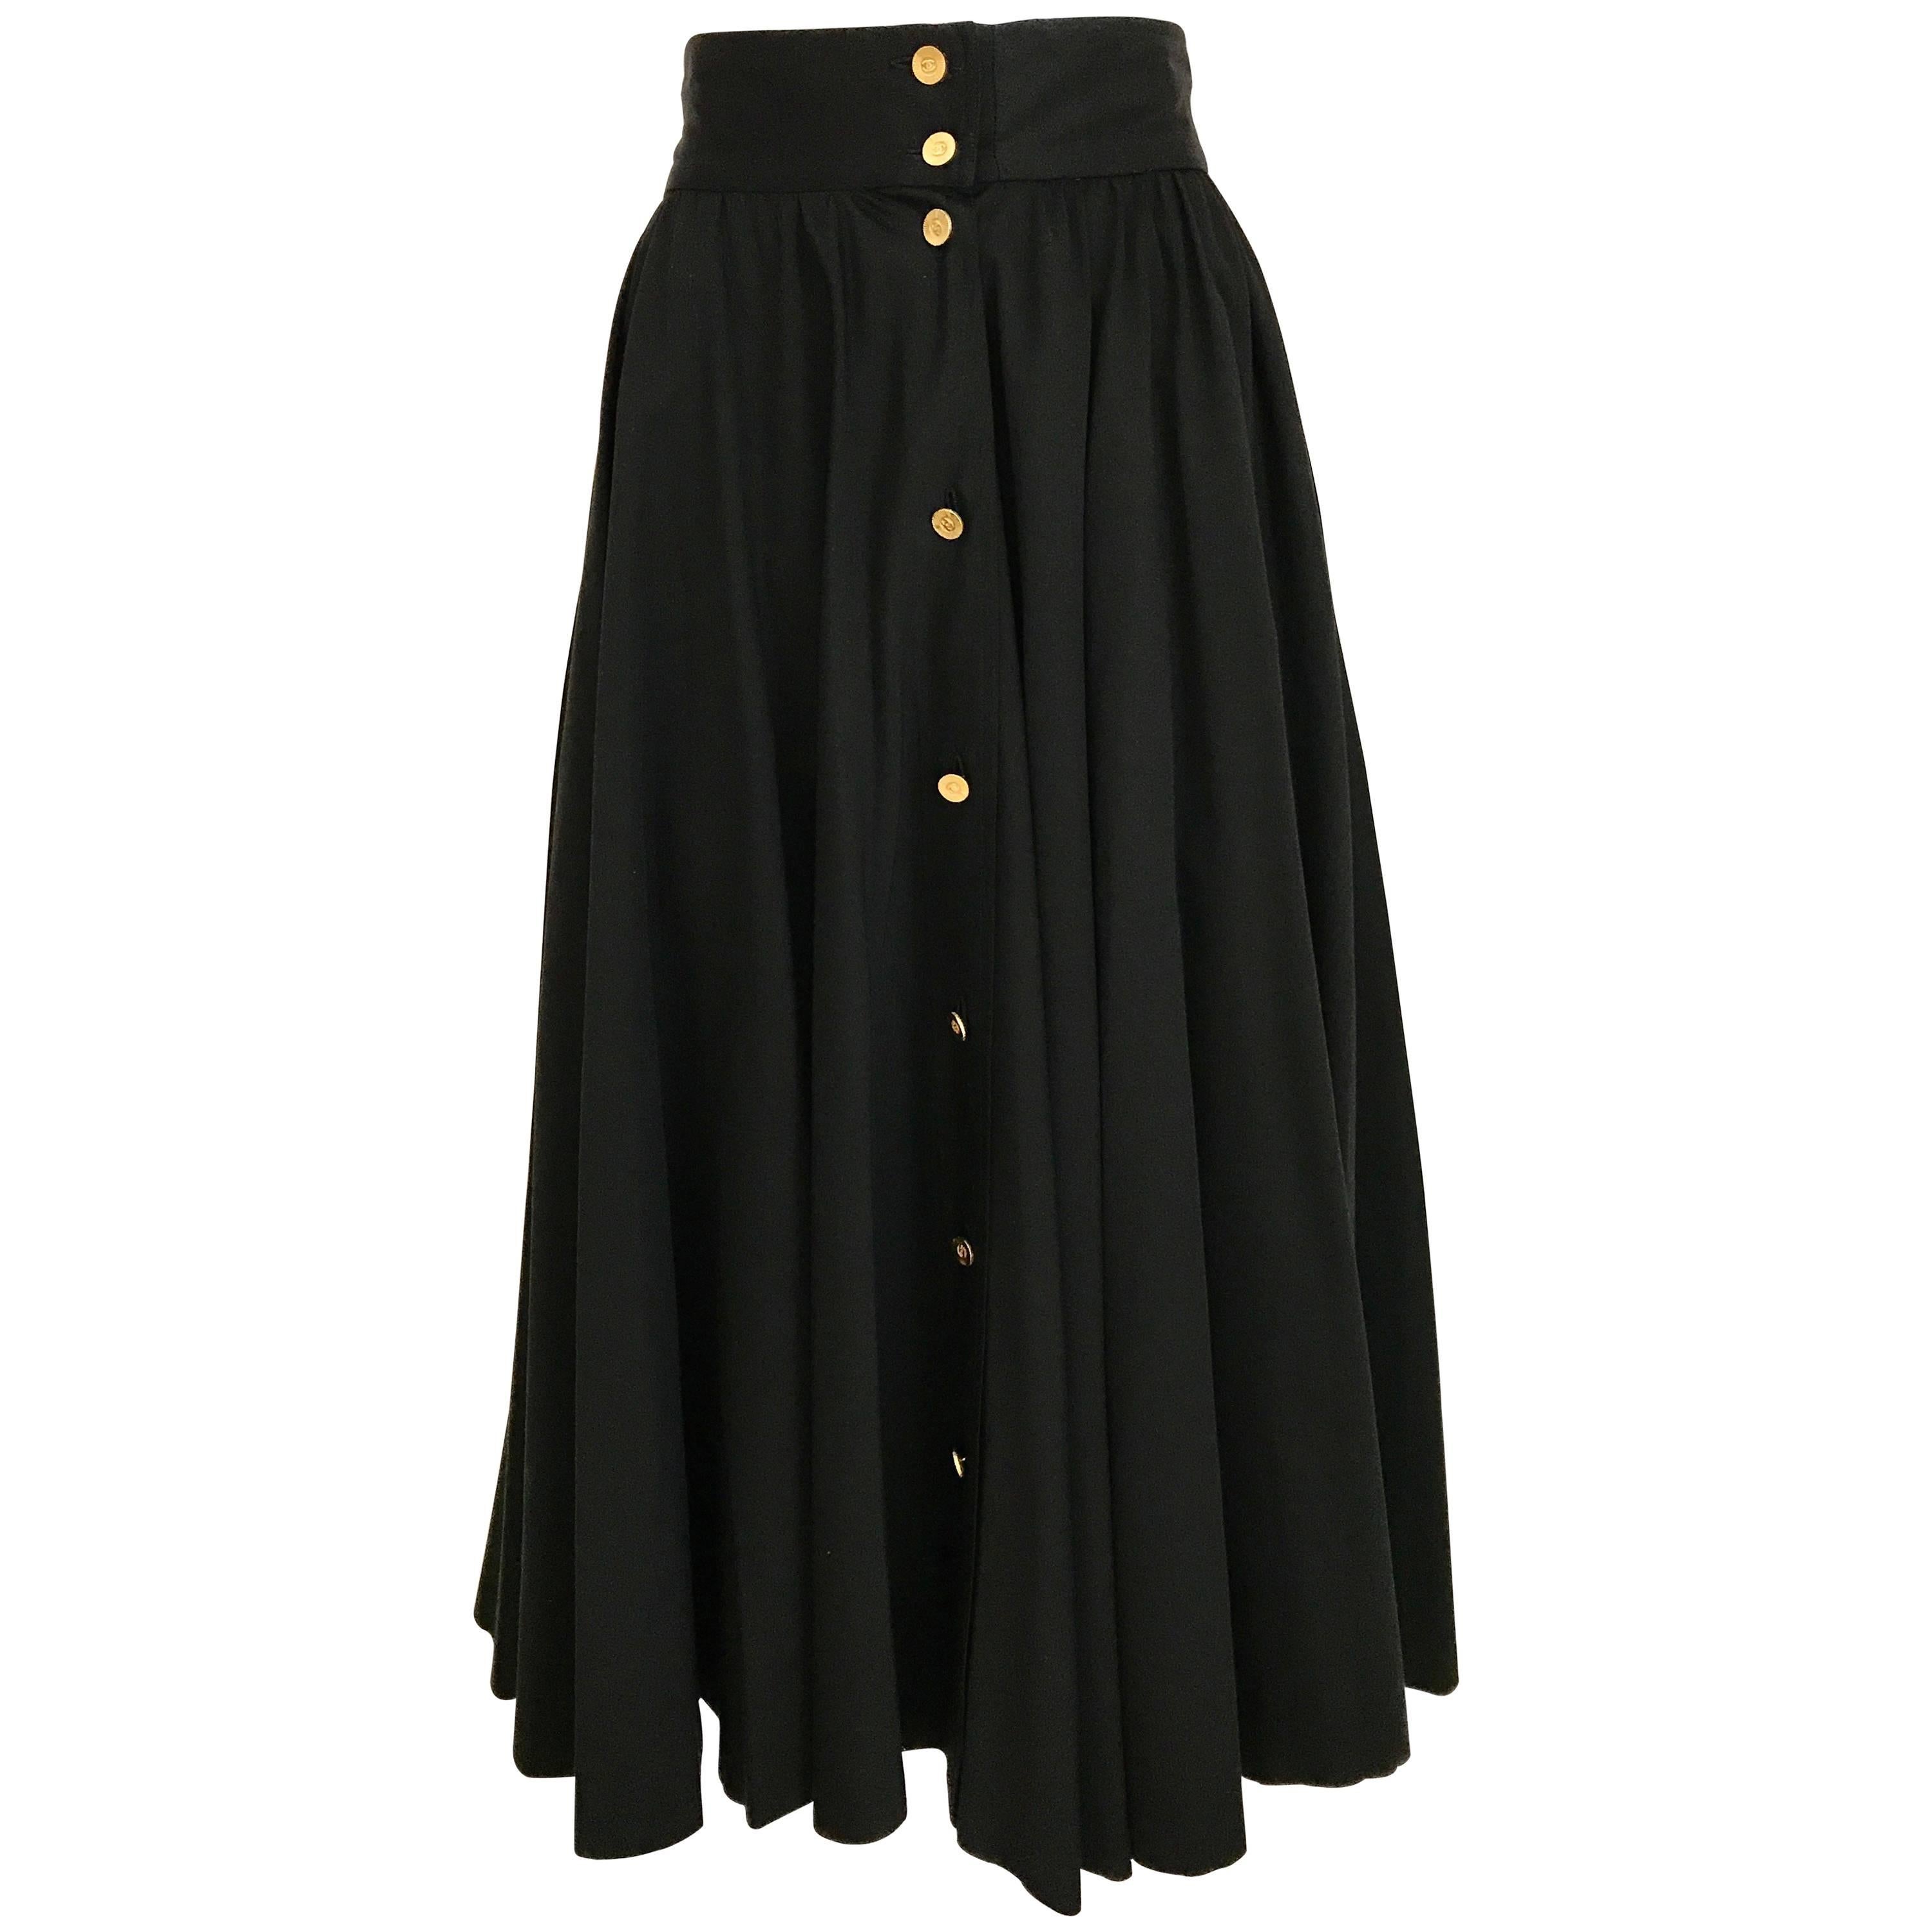 1970s CHANEL Black Cotton Skirt with Chanel Gold Button